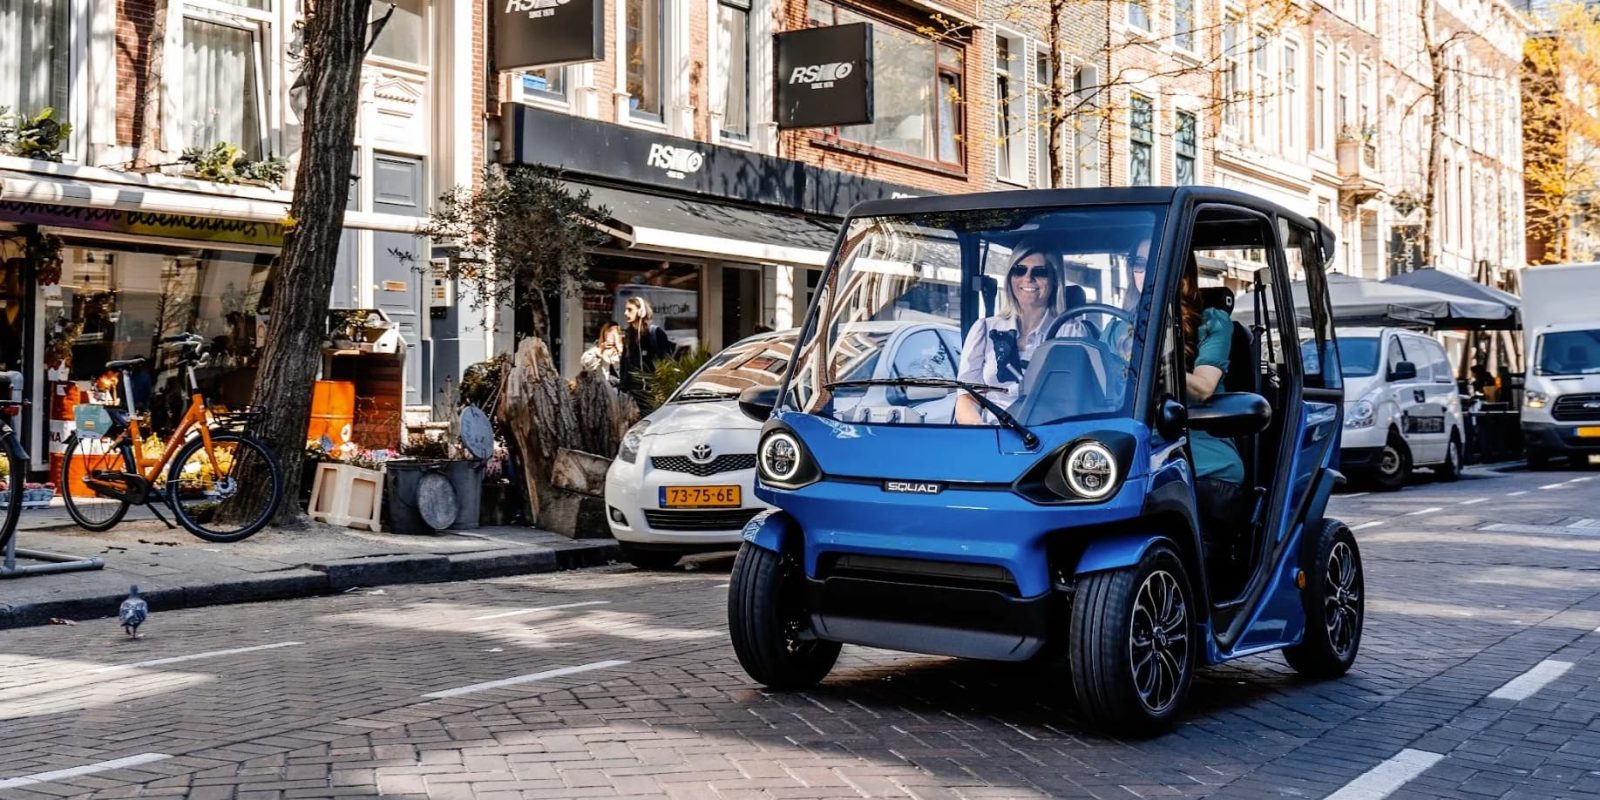 Lowcost tiny electric cars like these could be the next big thing